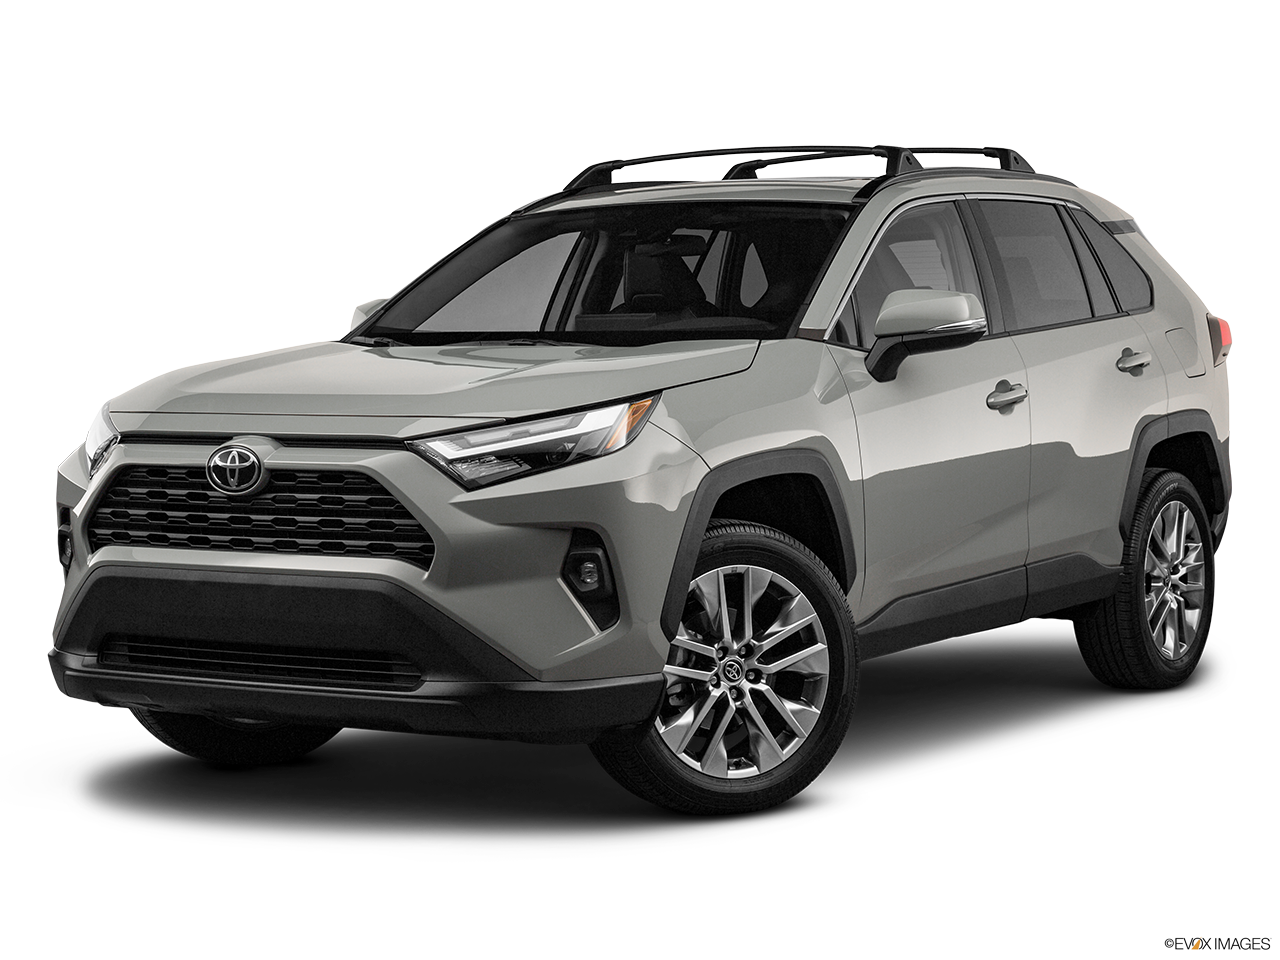 The Wait is Real: Toyota RAV4 Waiting Times in Canada